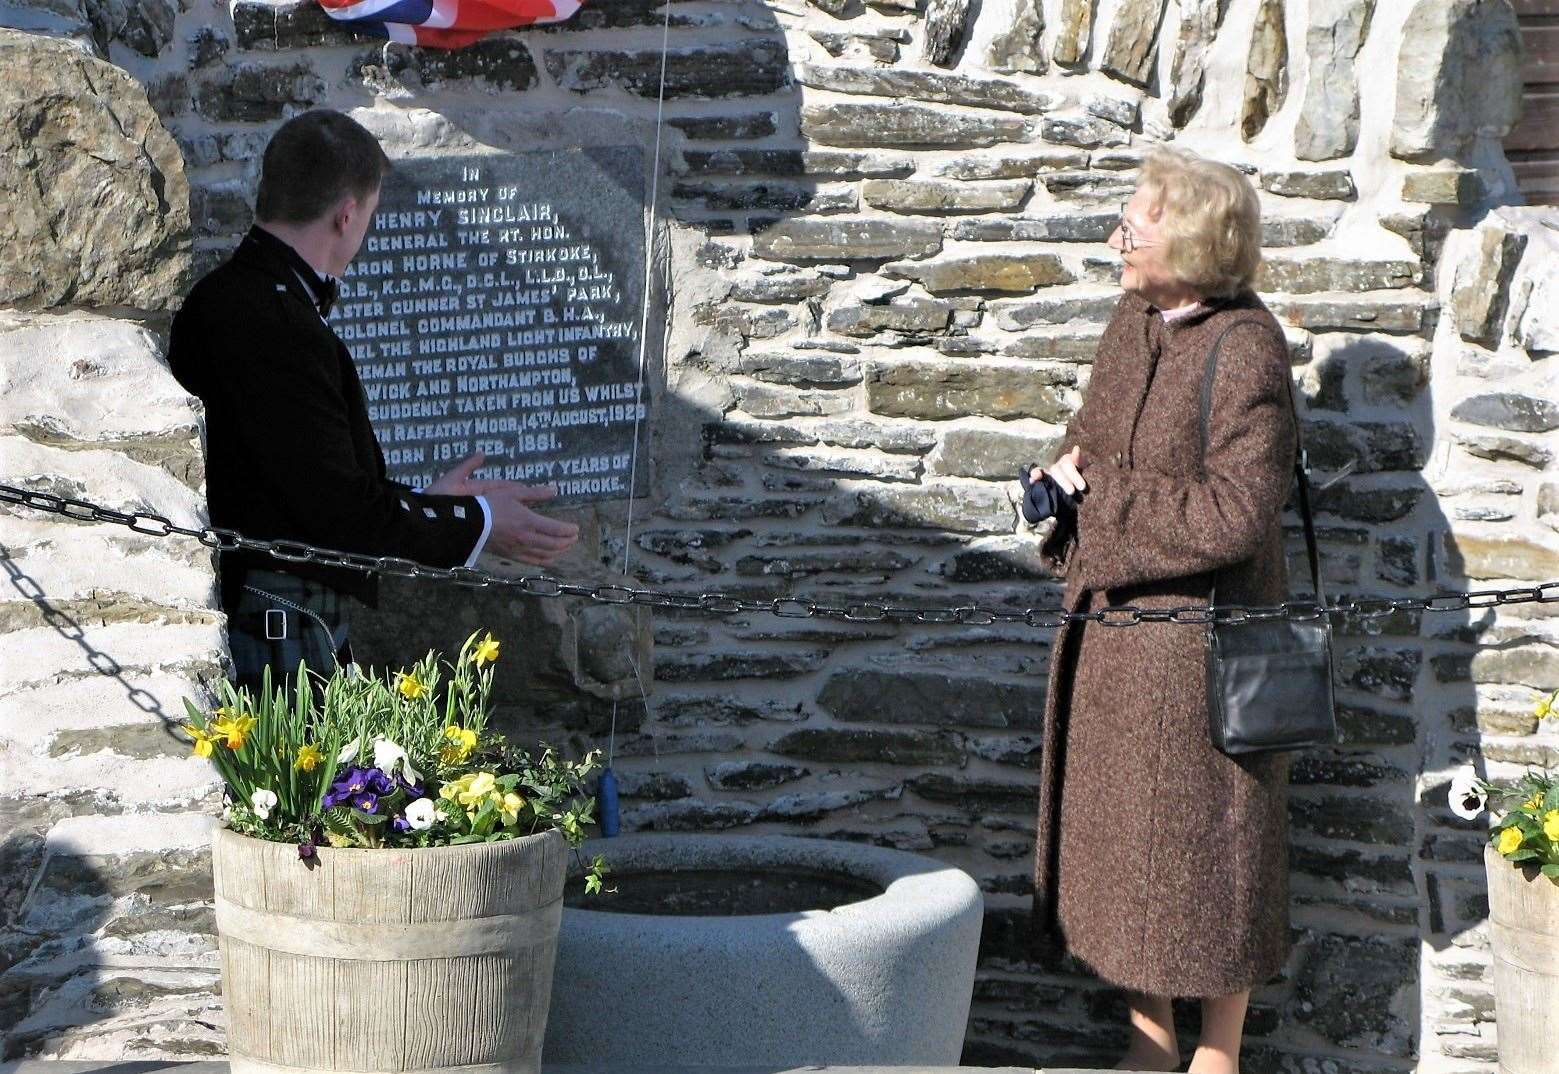 On March 31, 2007, Maive unveiled the refurbished memorial fountain to her grandfather, General Horne, at a ceremony in Haster.